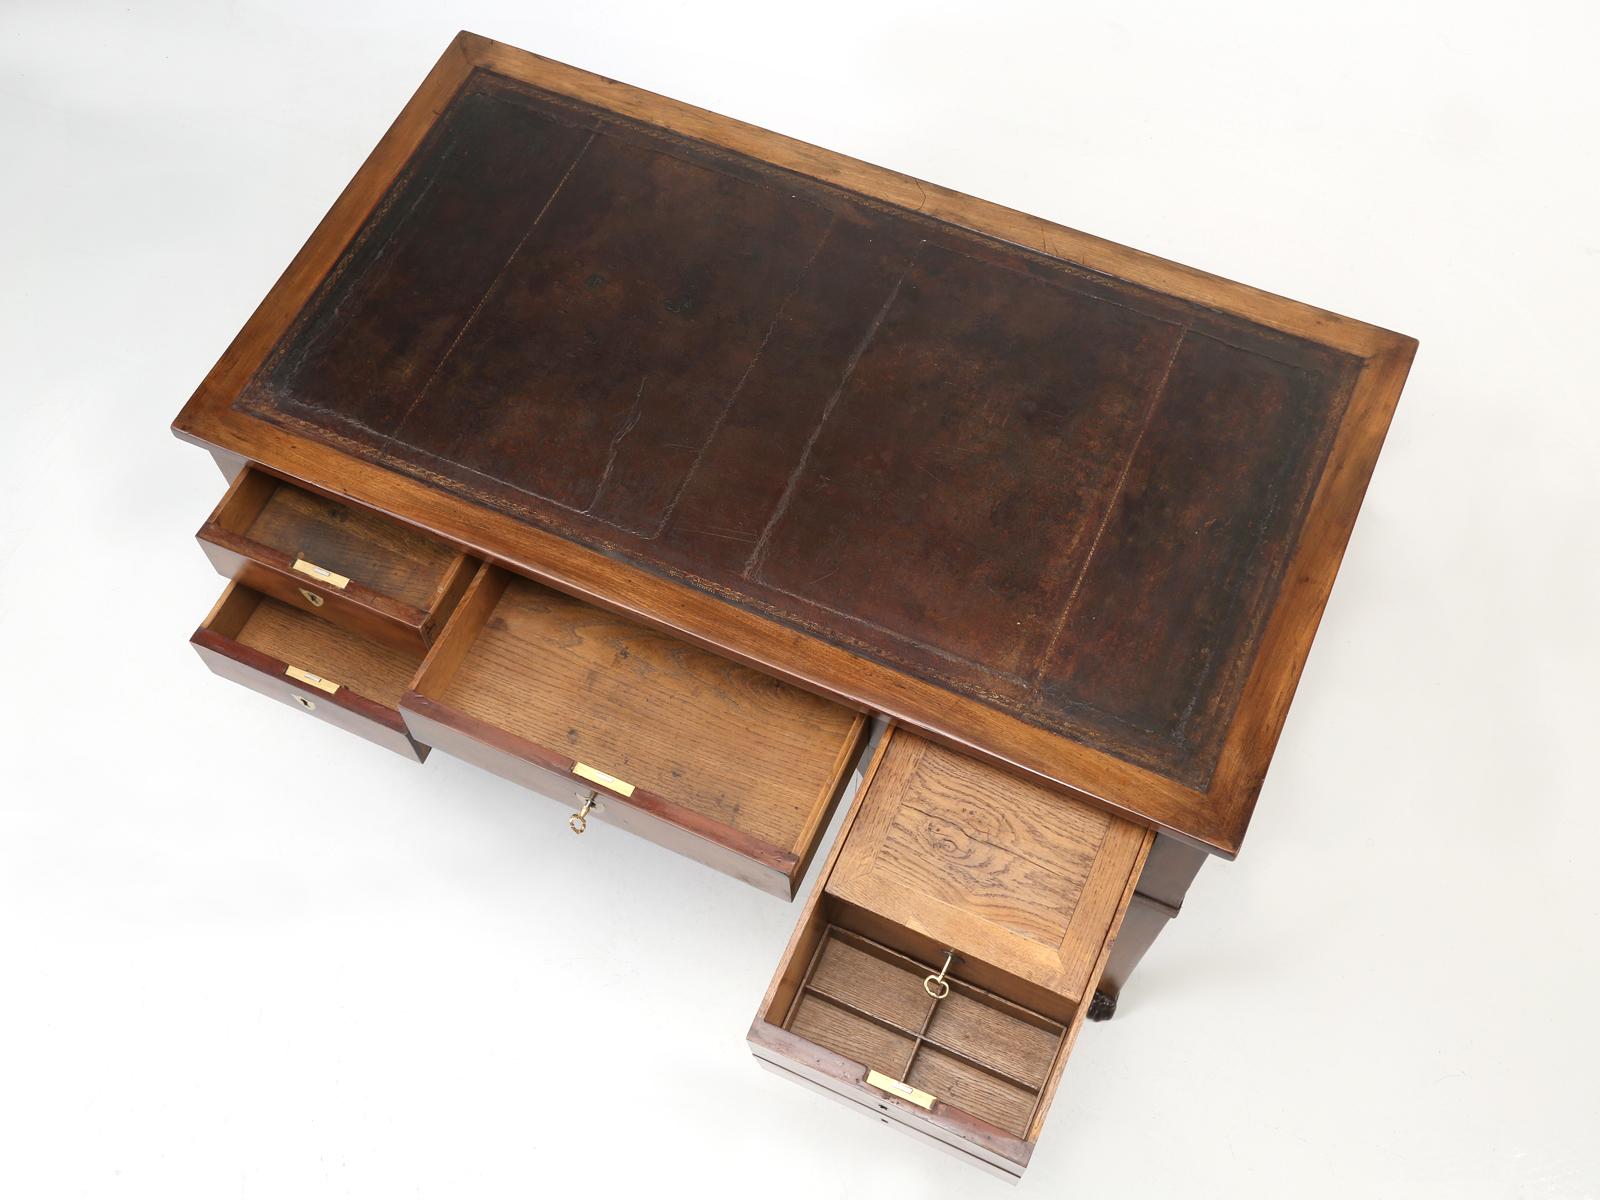 Beautiful antique French writing desk, made from mahogany with French white oak drawer interiors, circa 1880-1900. All the drawers have been thoroughly restored, and all locks actually function, with their own keys like they were intended to. Note